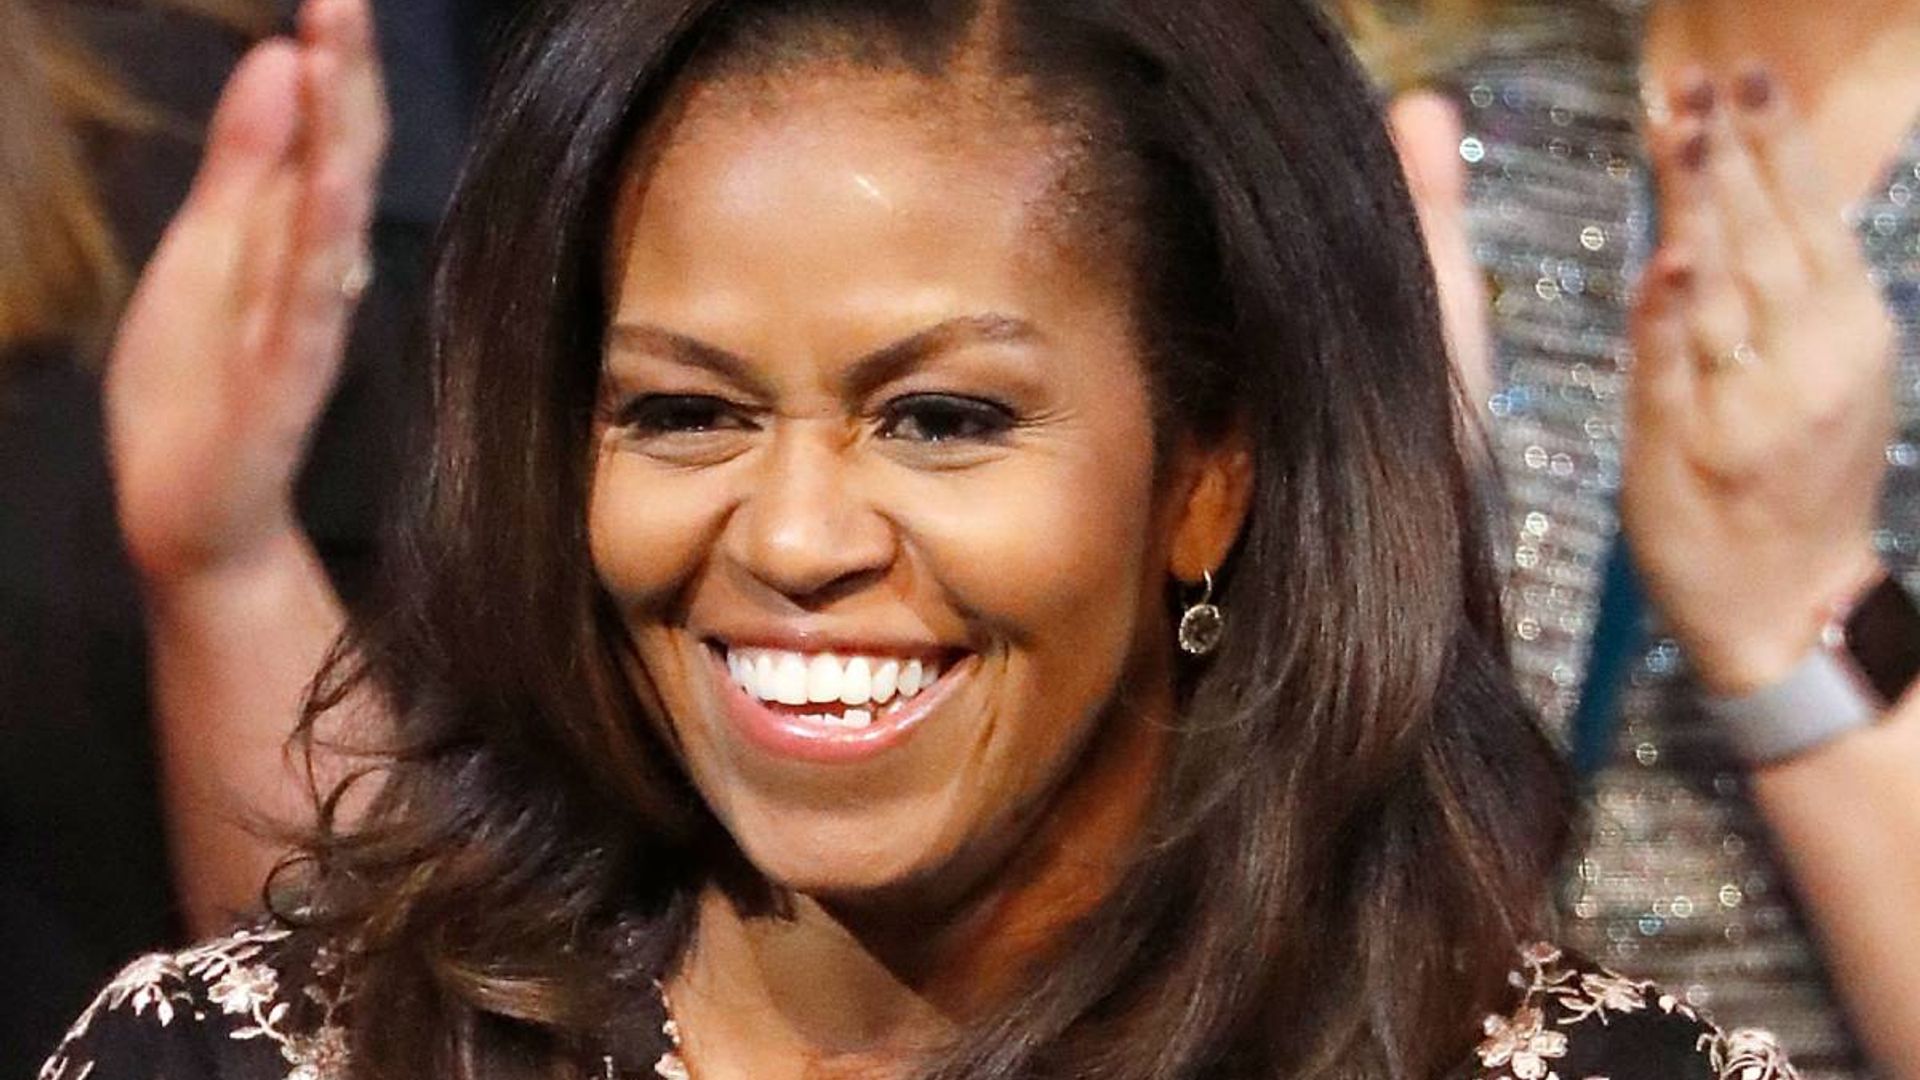 Michelle Obama wows in stylish mini dress in celebratory photo inside family home